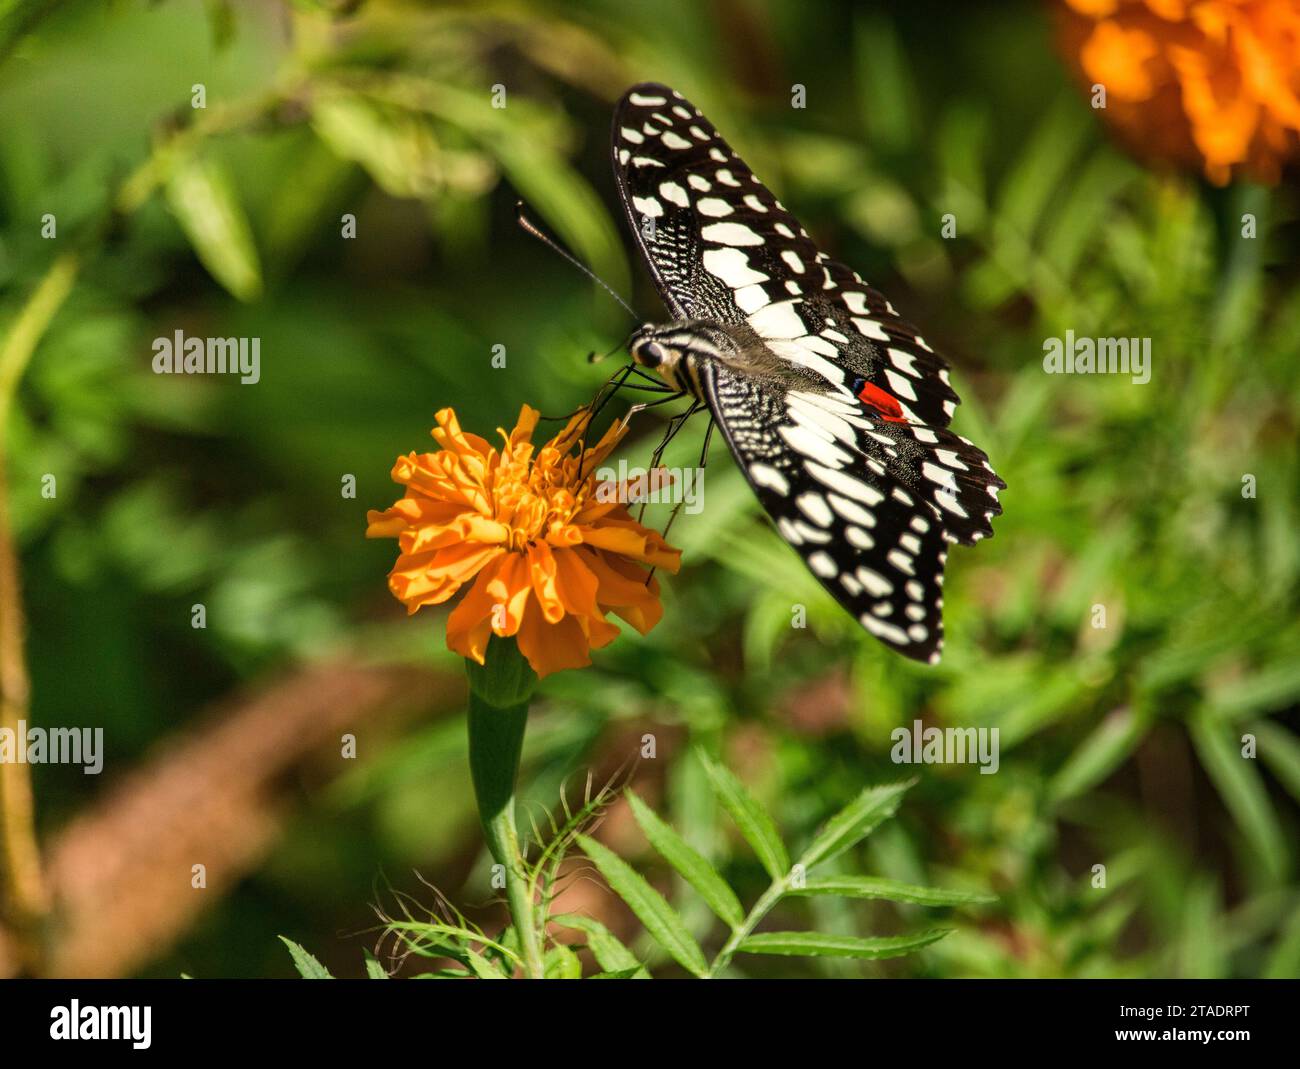 A butterfly on a flower marigold,Beautiful Colorful plant in background. Stock Photo